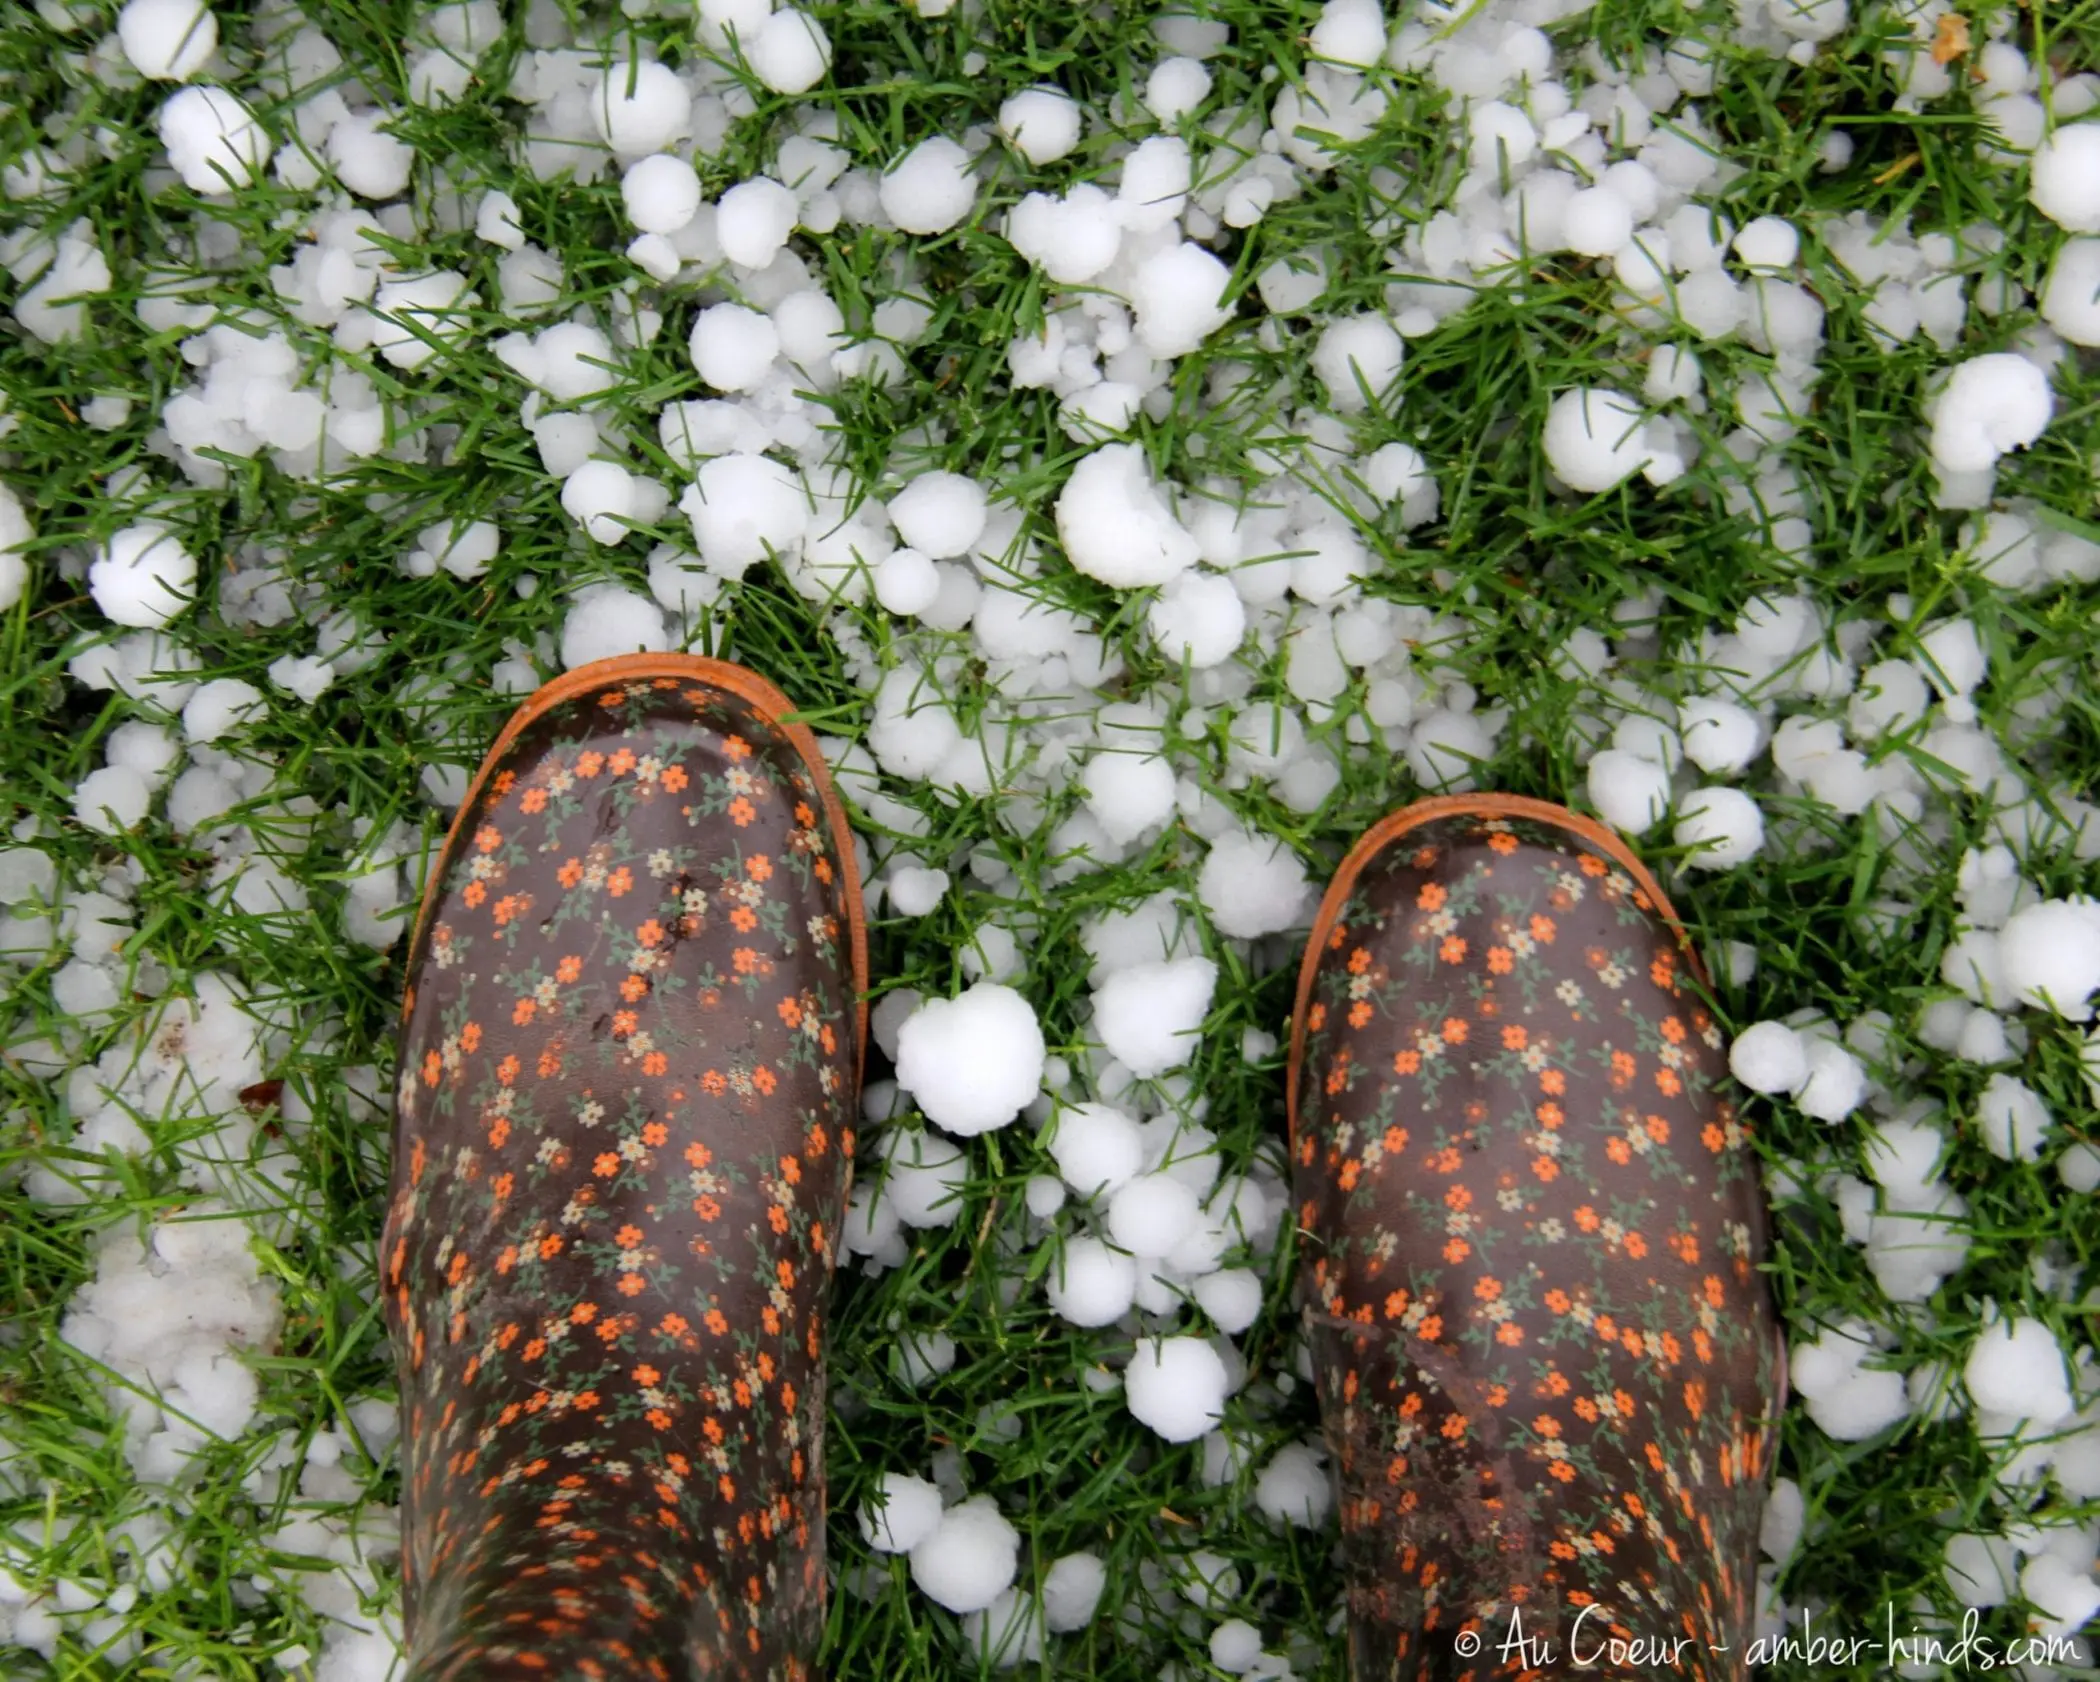 Wordless Wednesday: Super Hail Storm Day